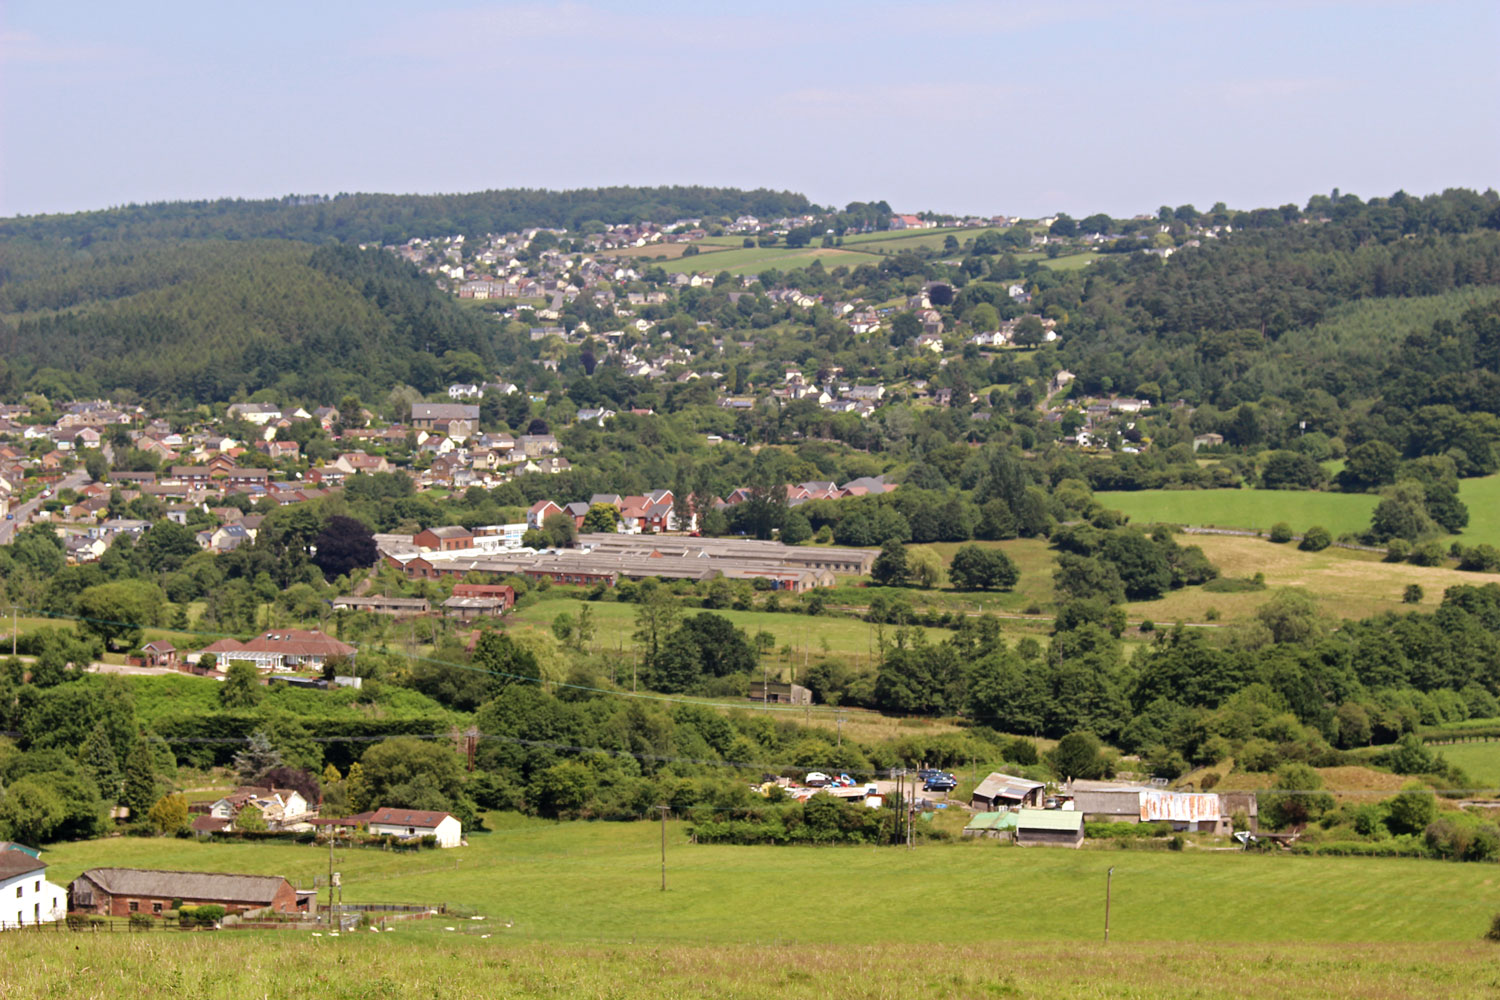 A photo showing a view of Whitecroft, Pillowell and Yorkley